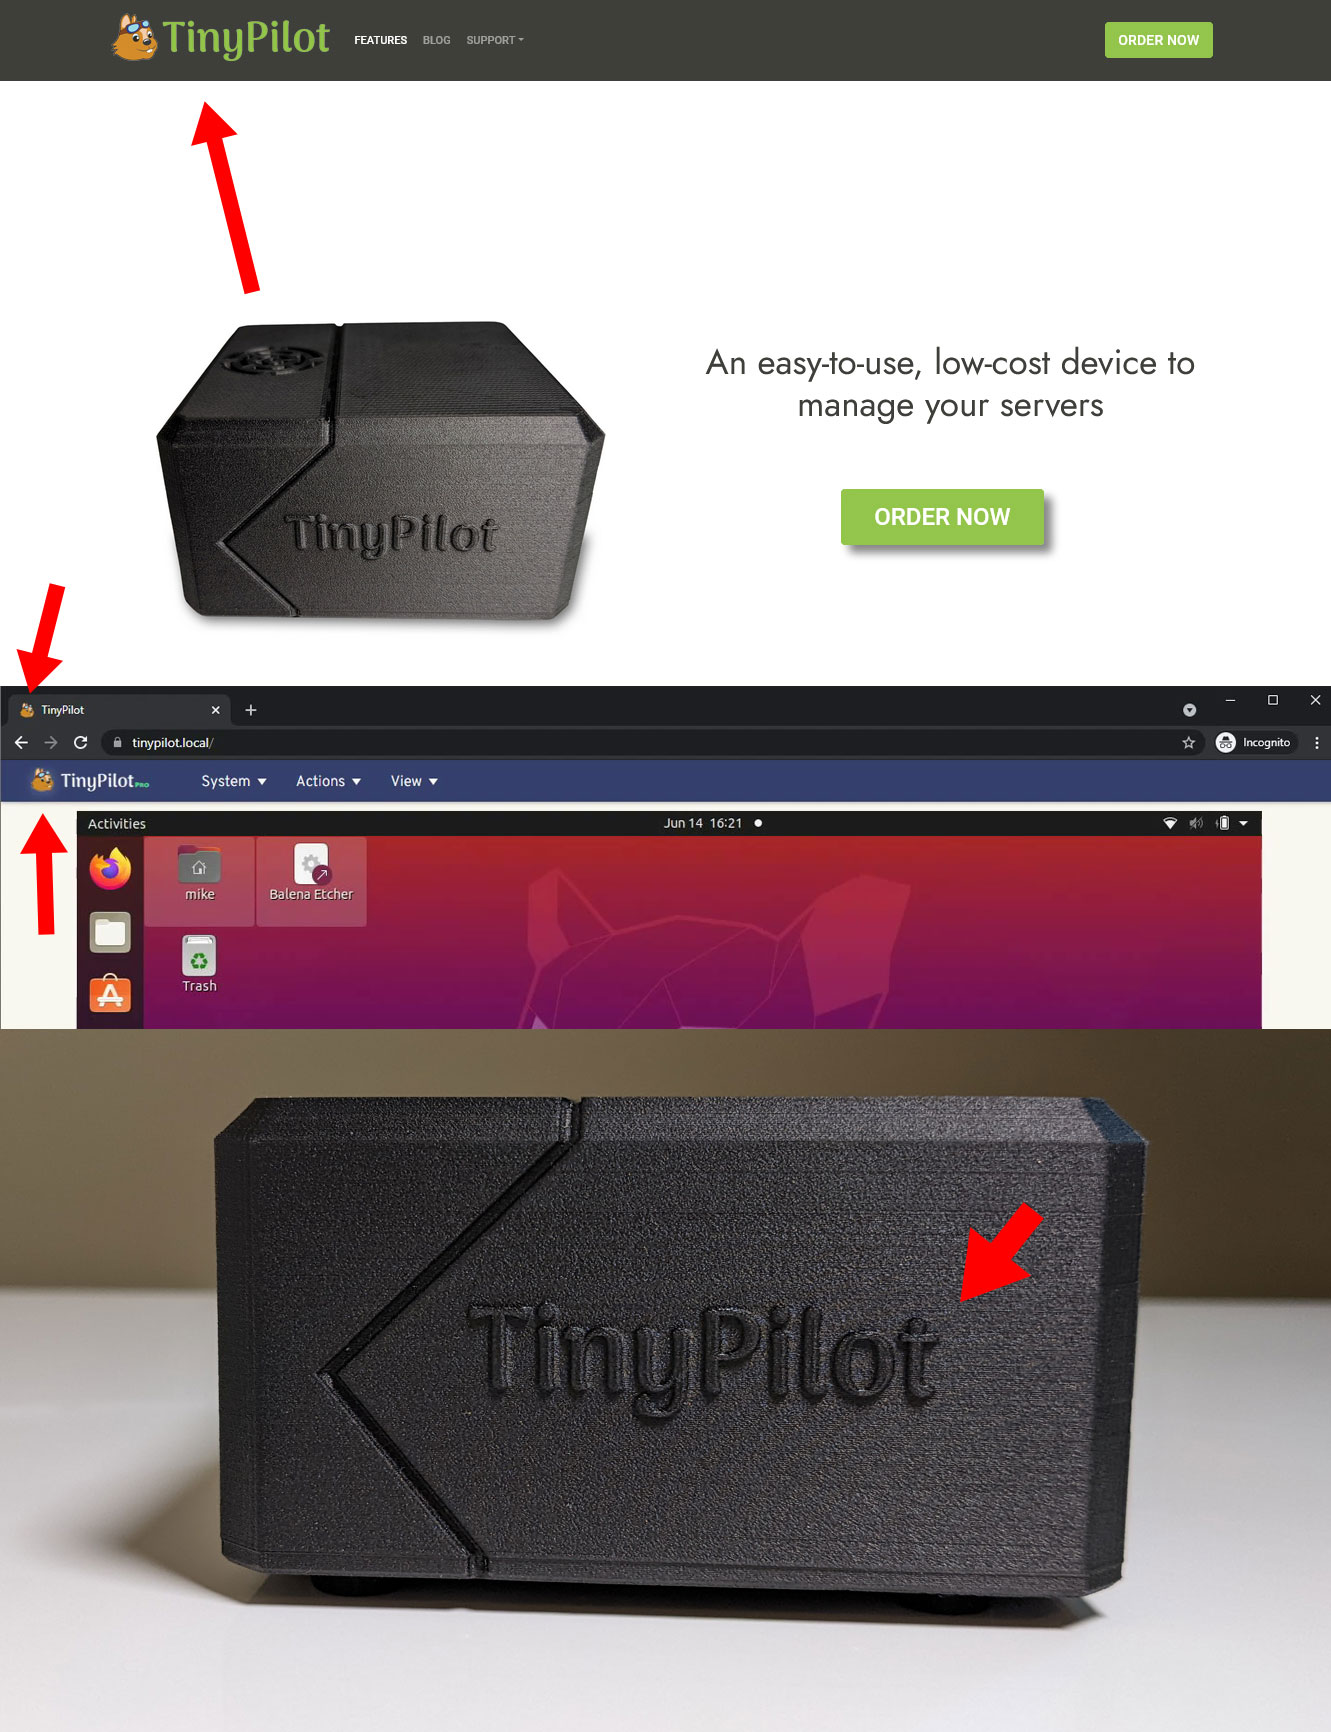 Photos of TinyPilot website, app interface, and case showing the old logo